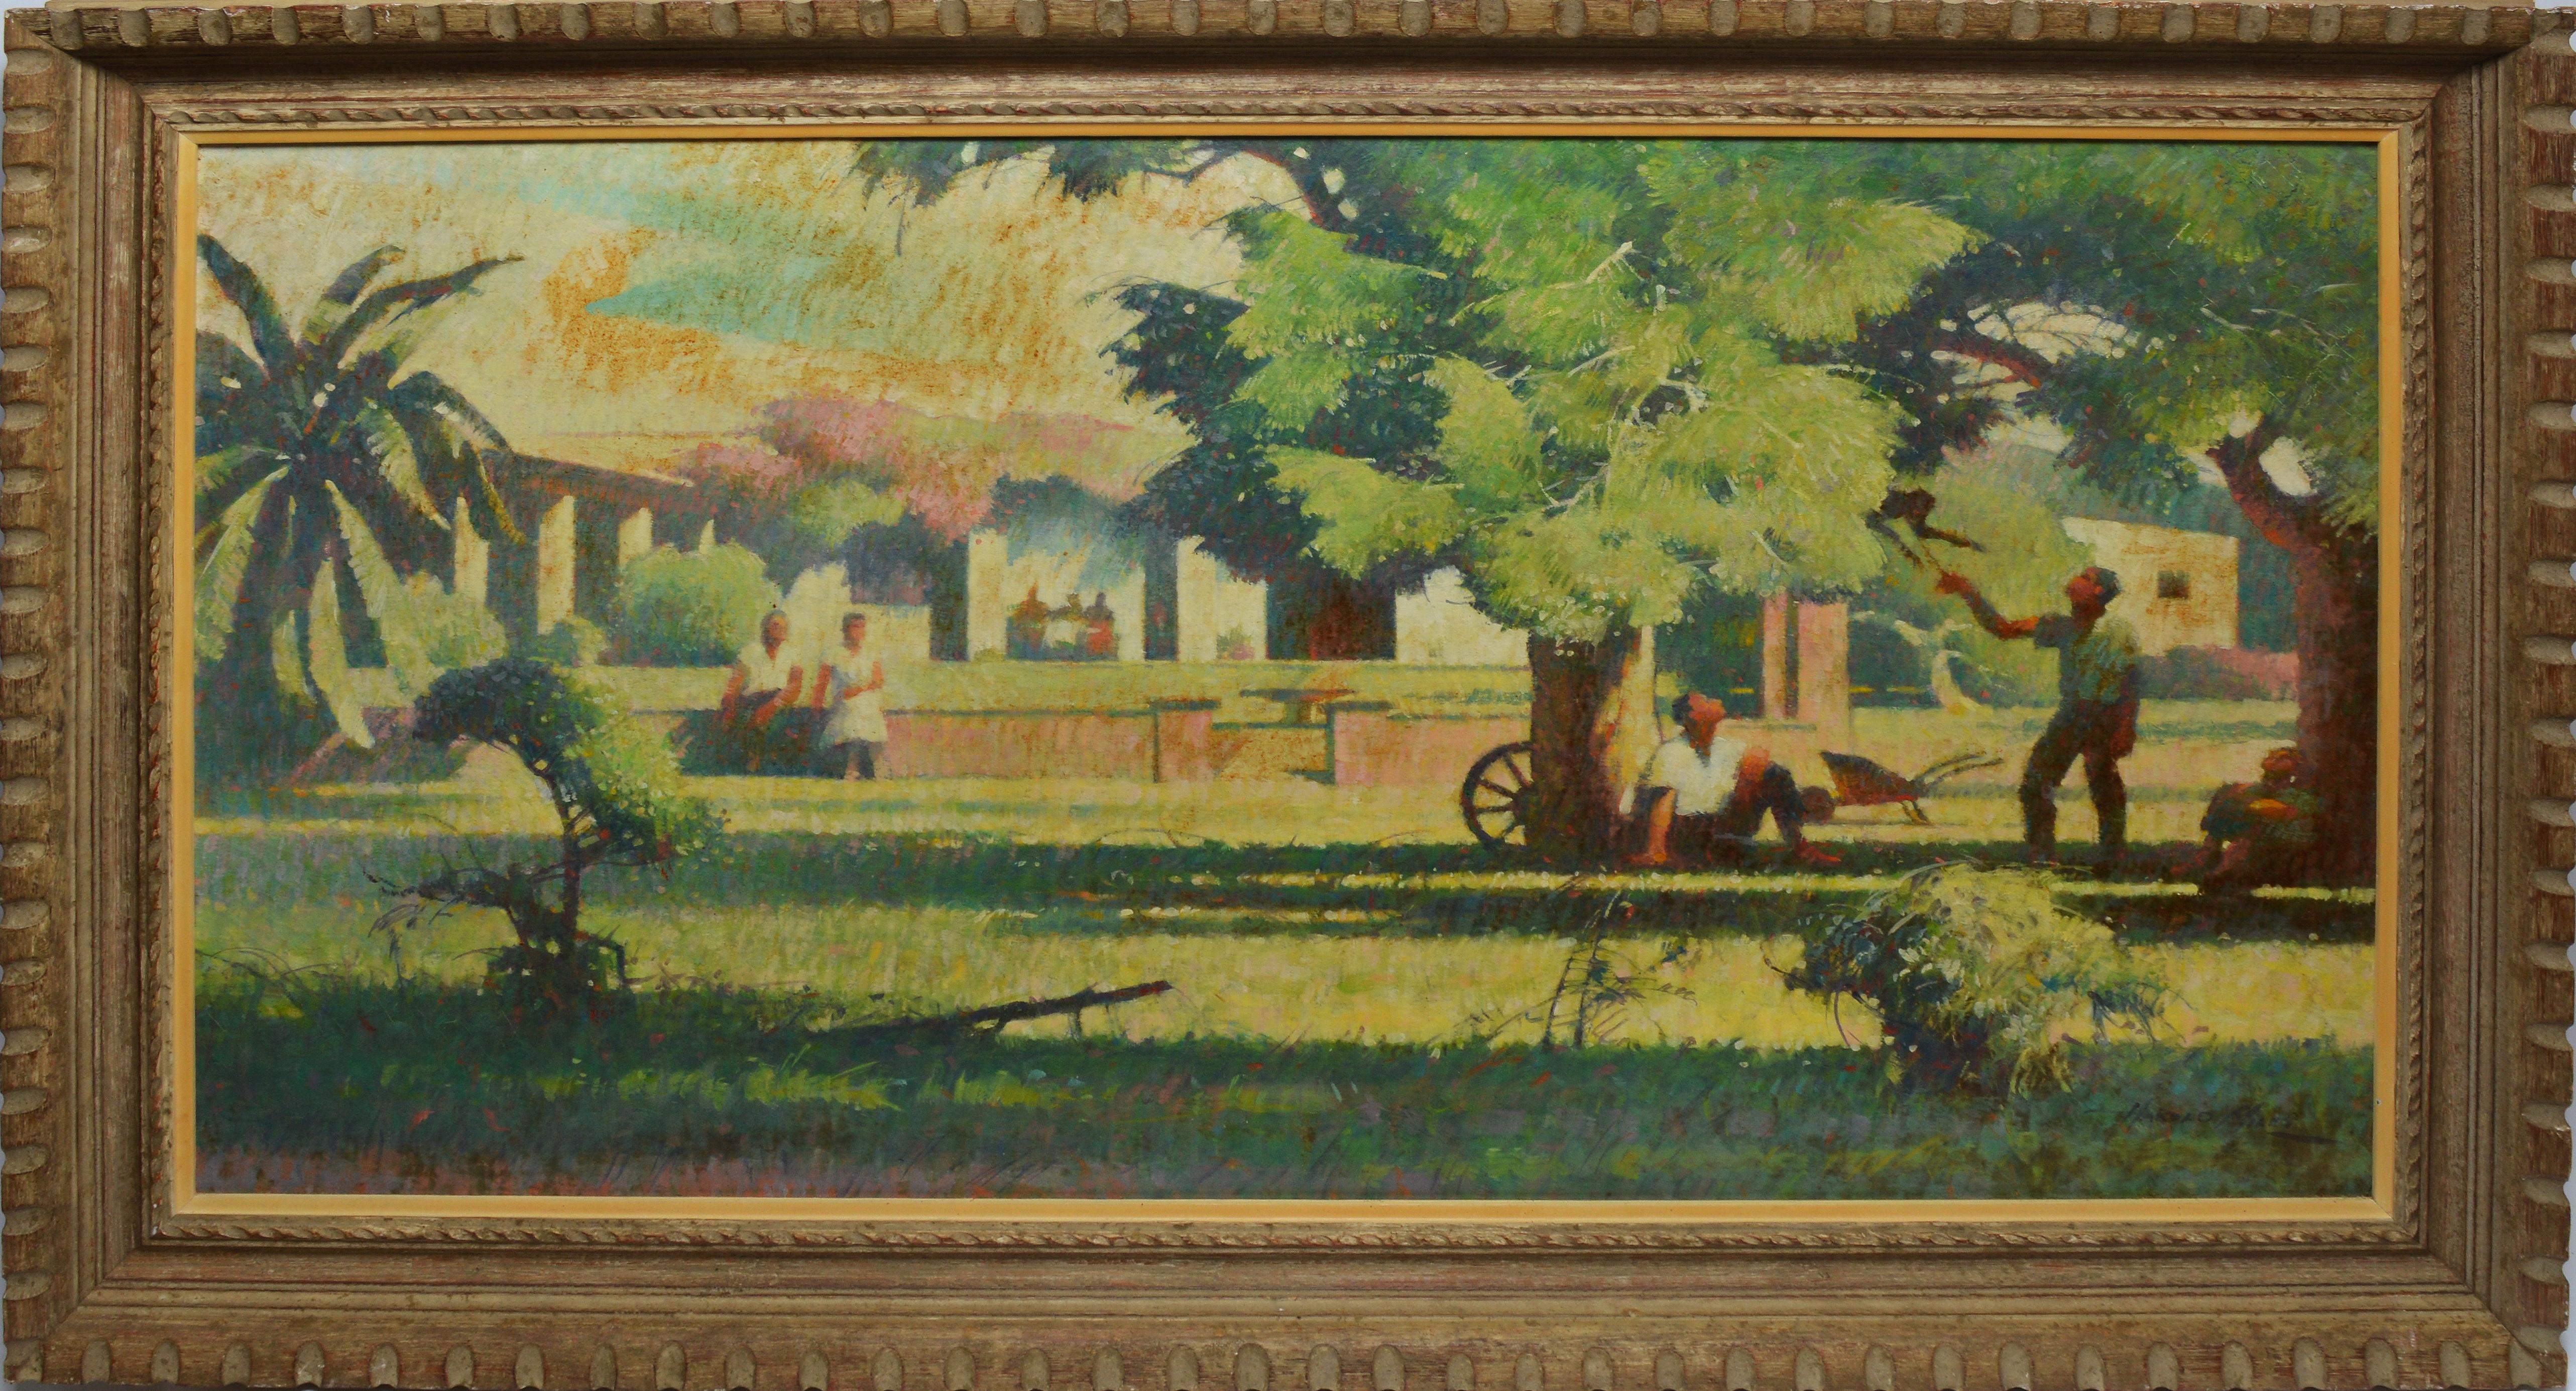 Harold Whiting Miles Landscape Painting - Antique Modernist California Farm Landscape Oil Painting by Harold Miles